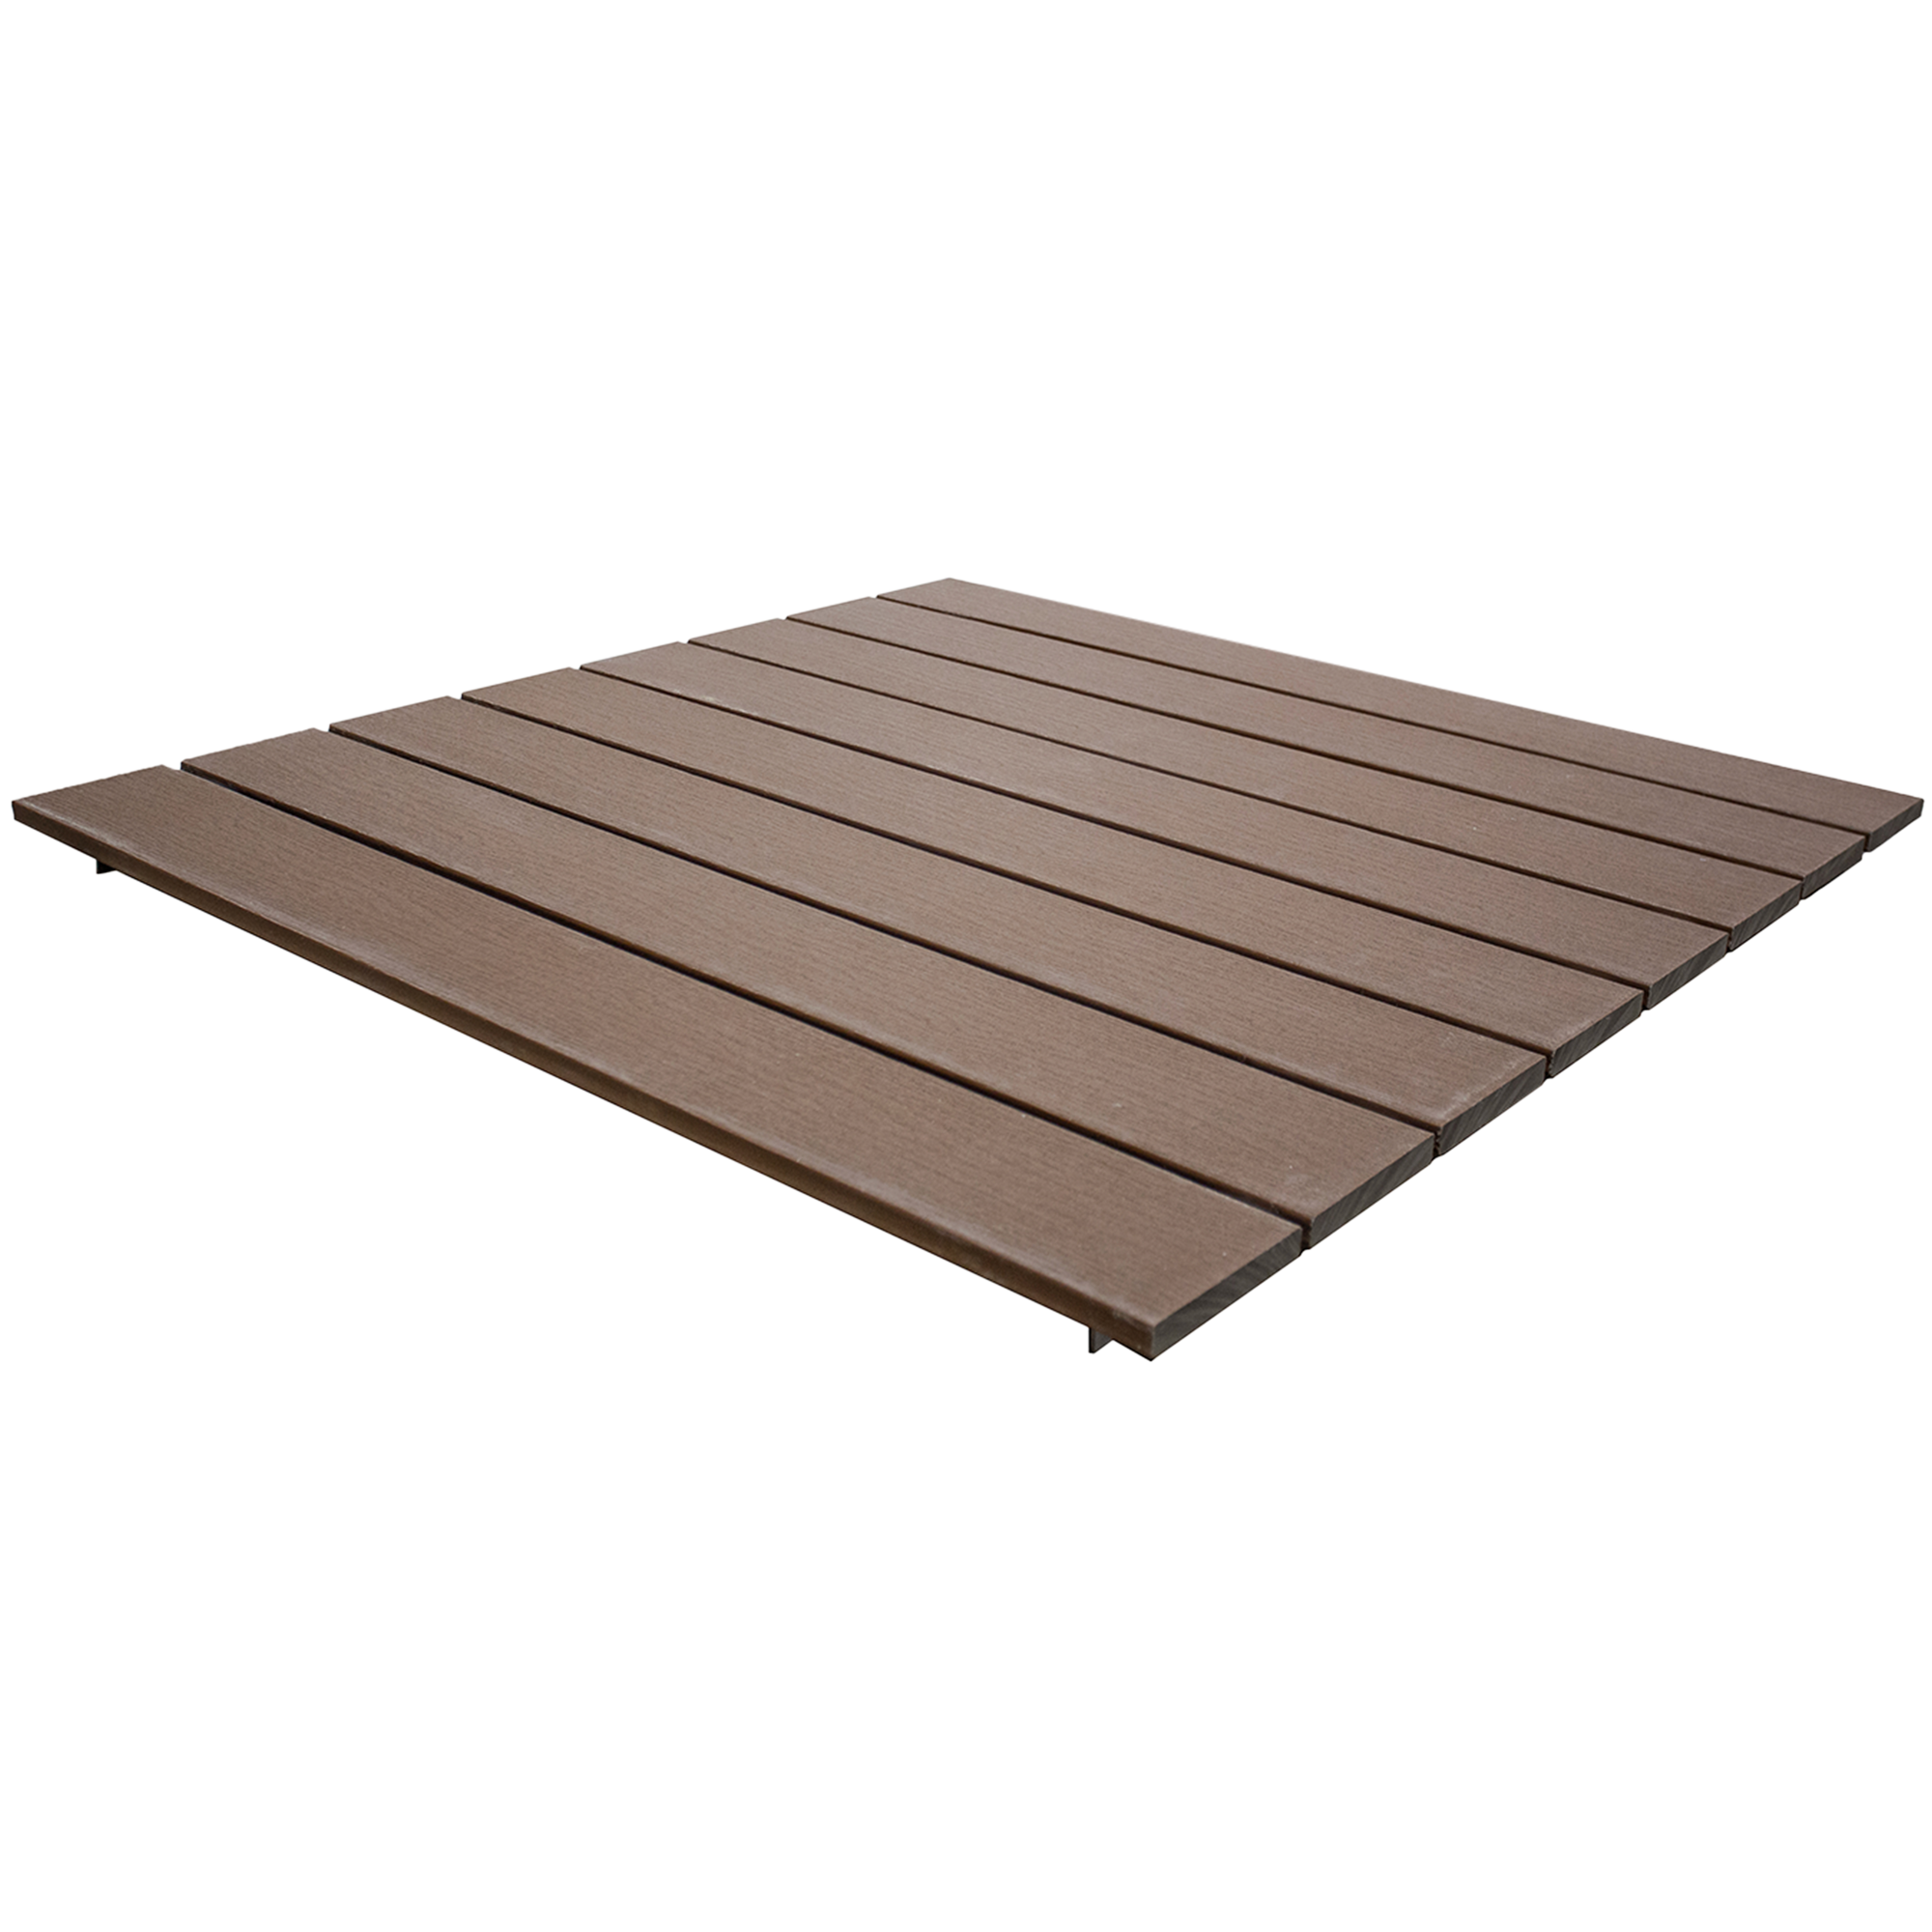 4' X 4' Drop In Panel Kit - Composite - WOODLAND BROWN